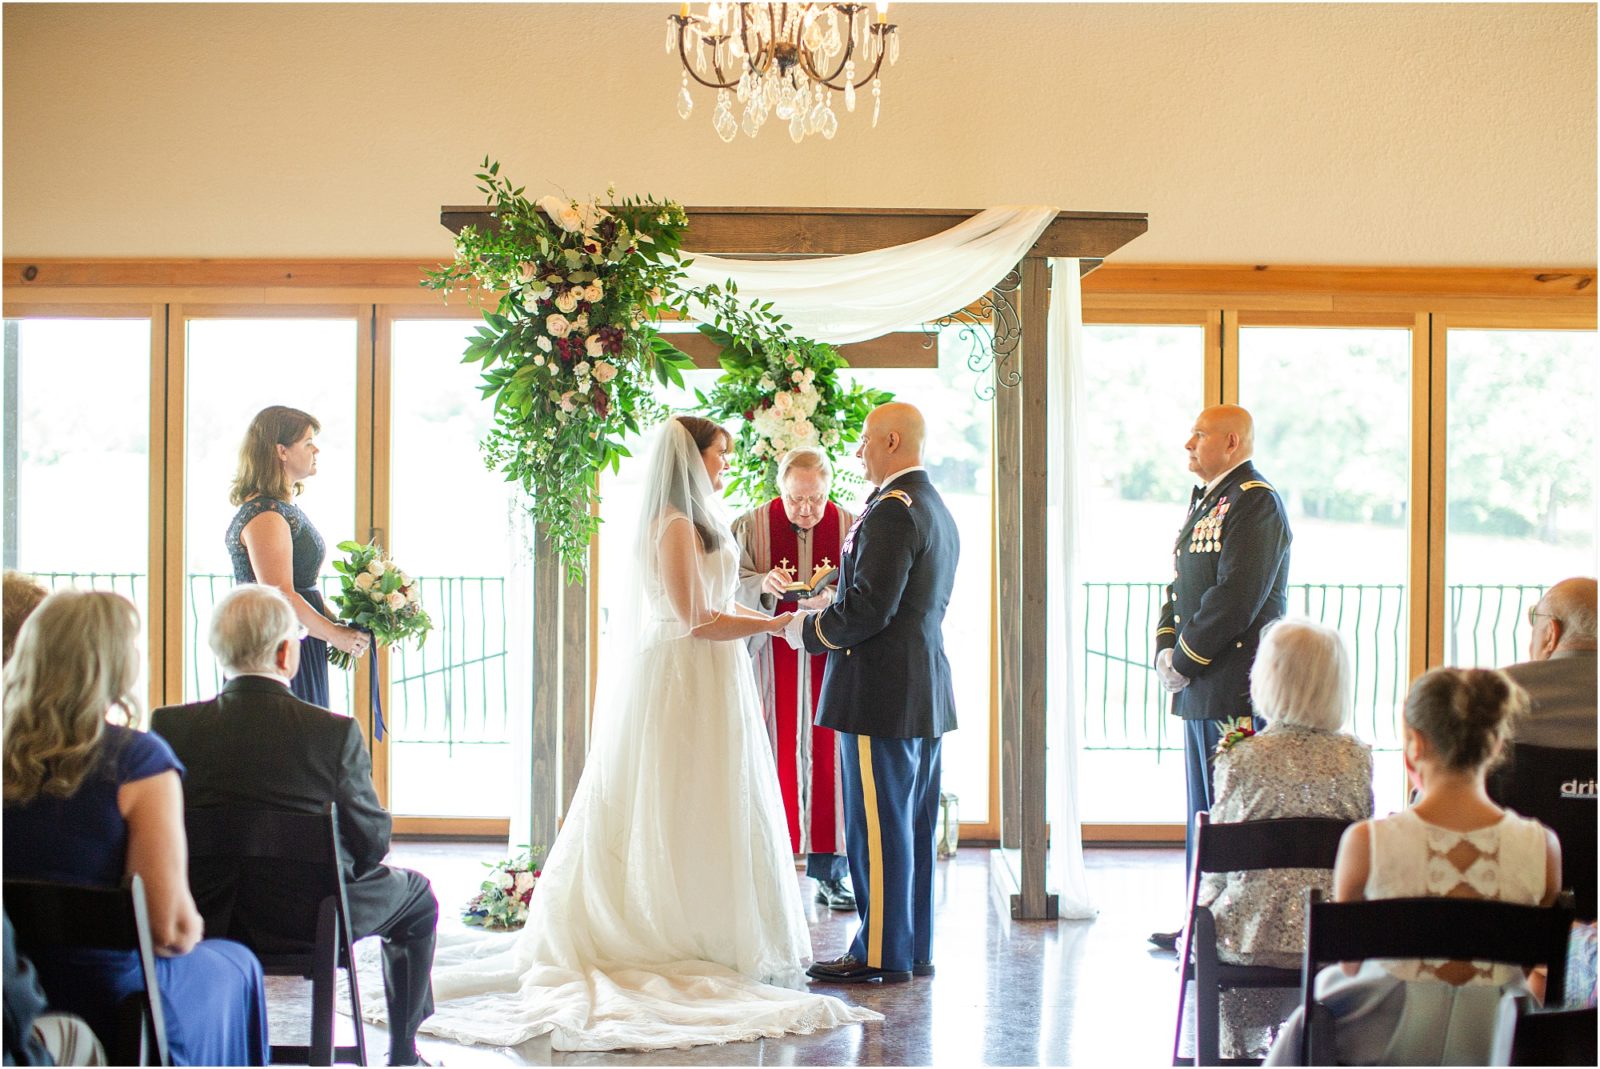 Couple standing in front of priest during wedding